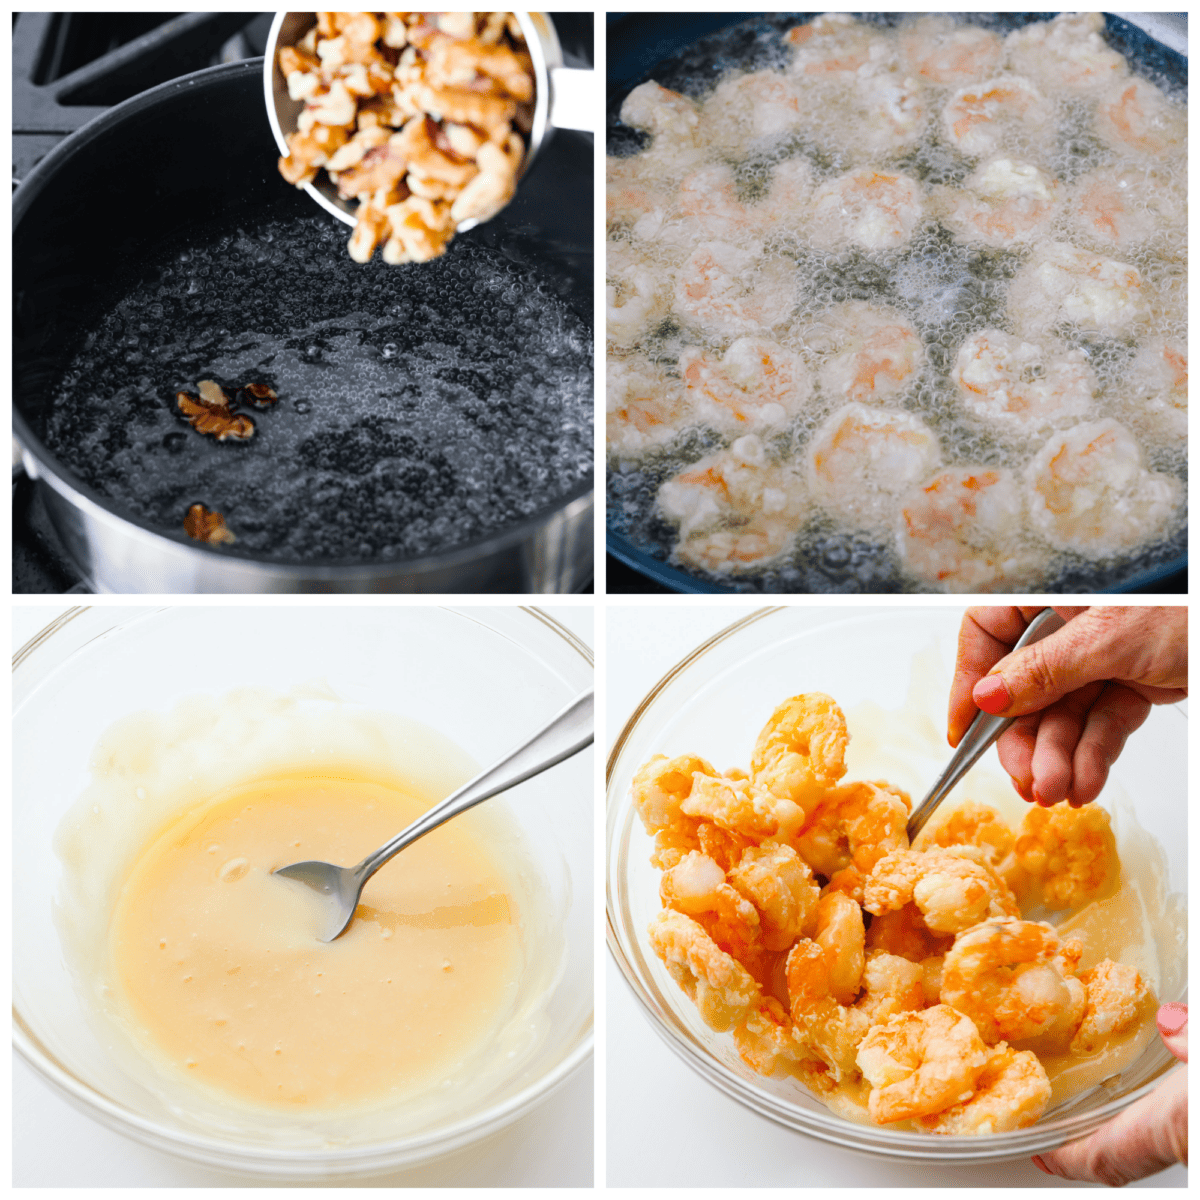 4-photo collage of the shrimp being breaded and fried.